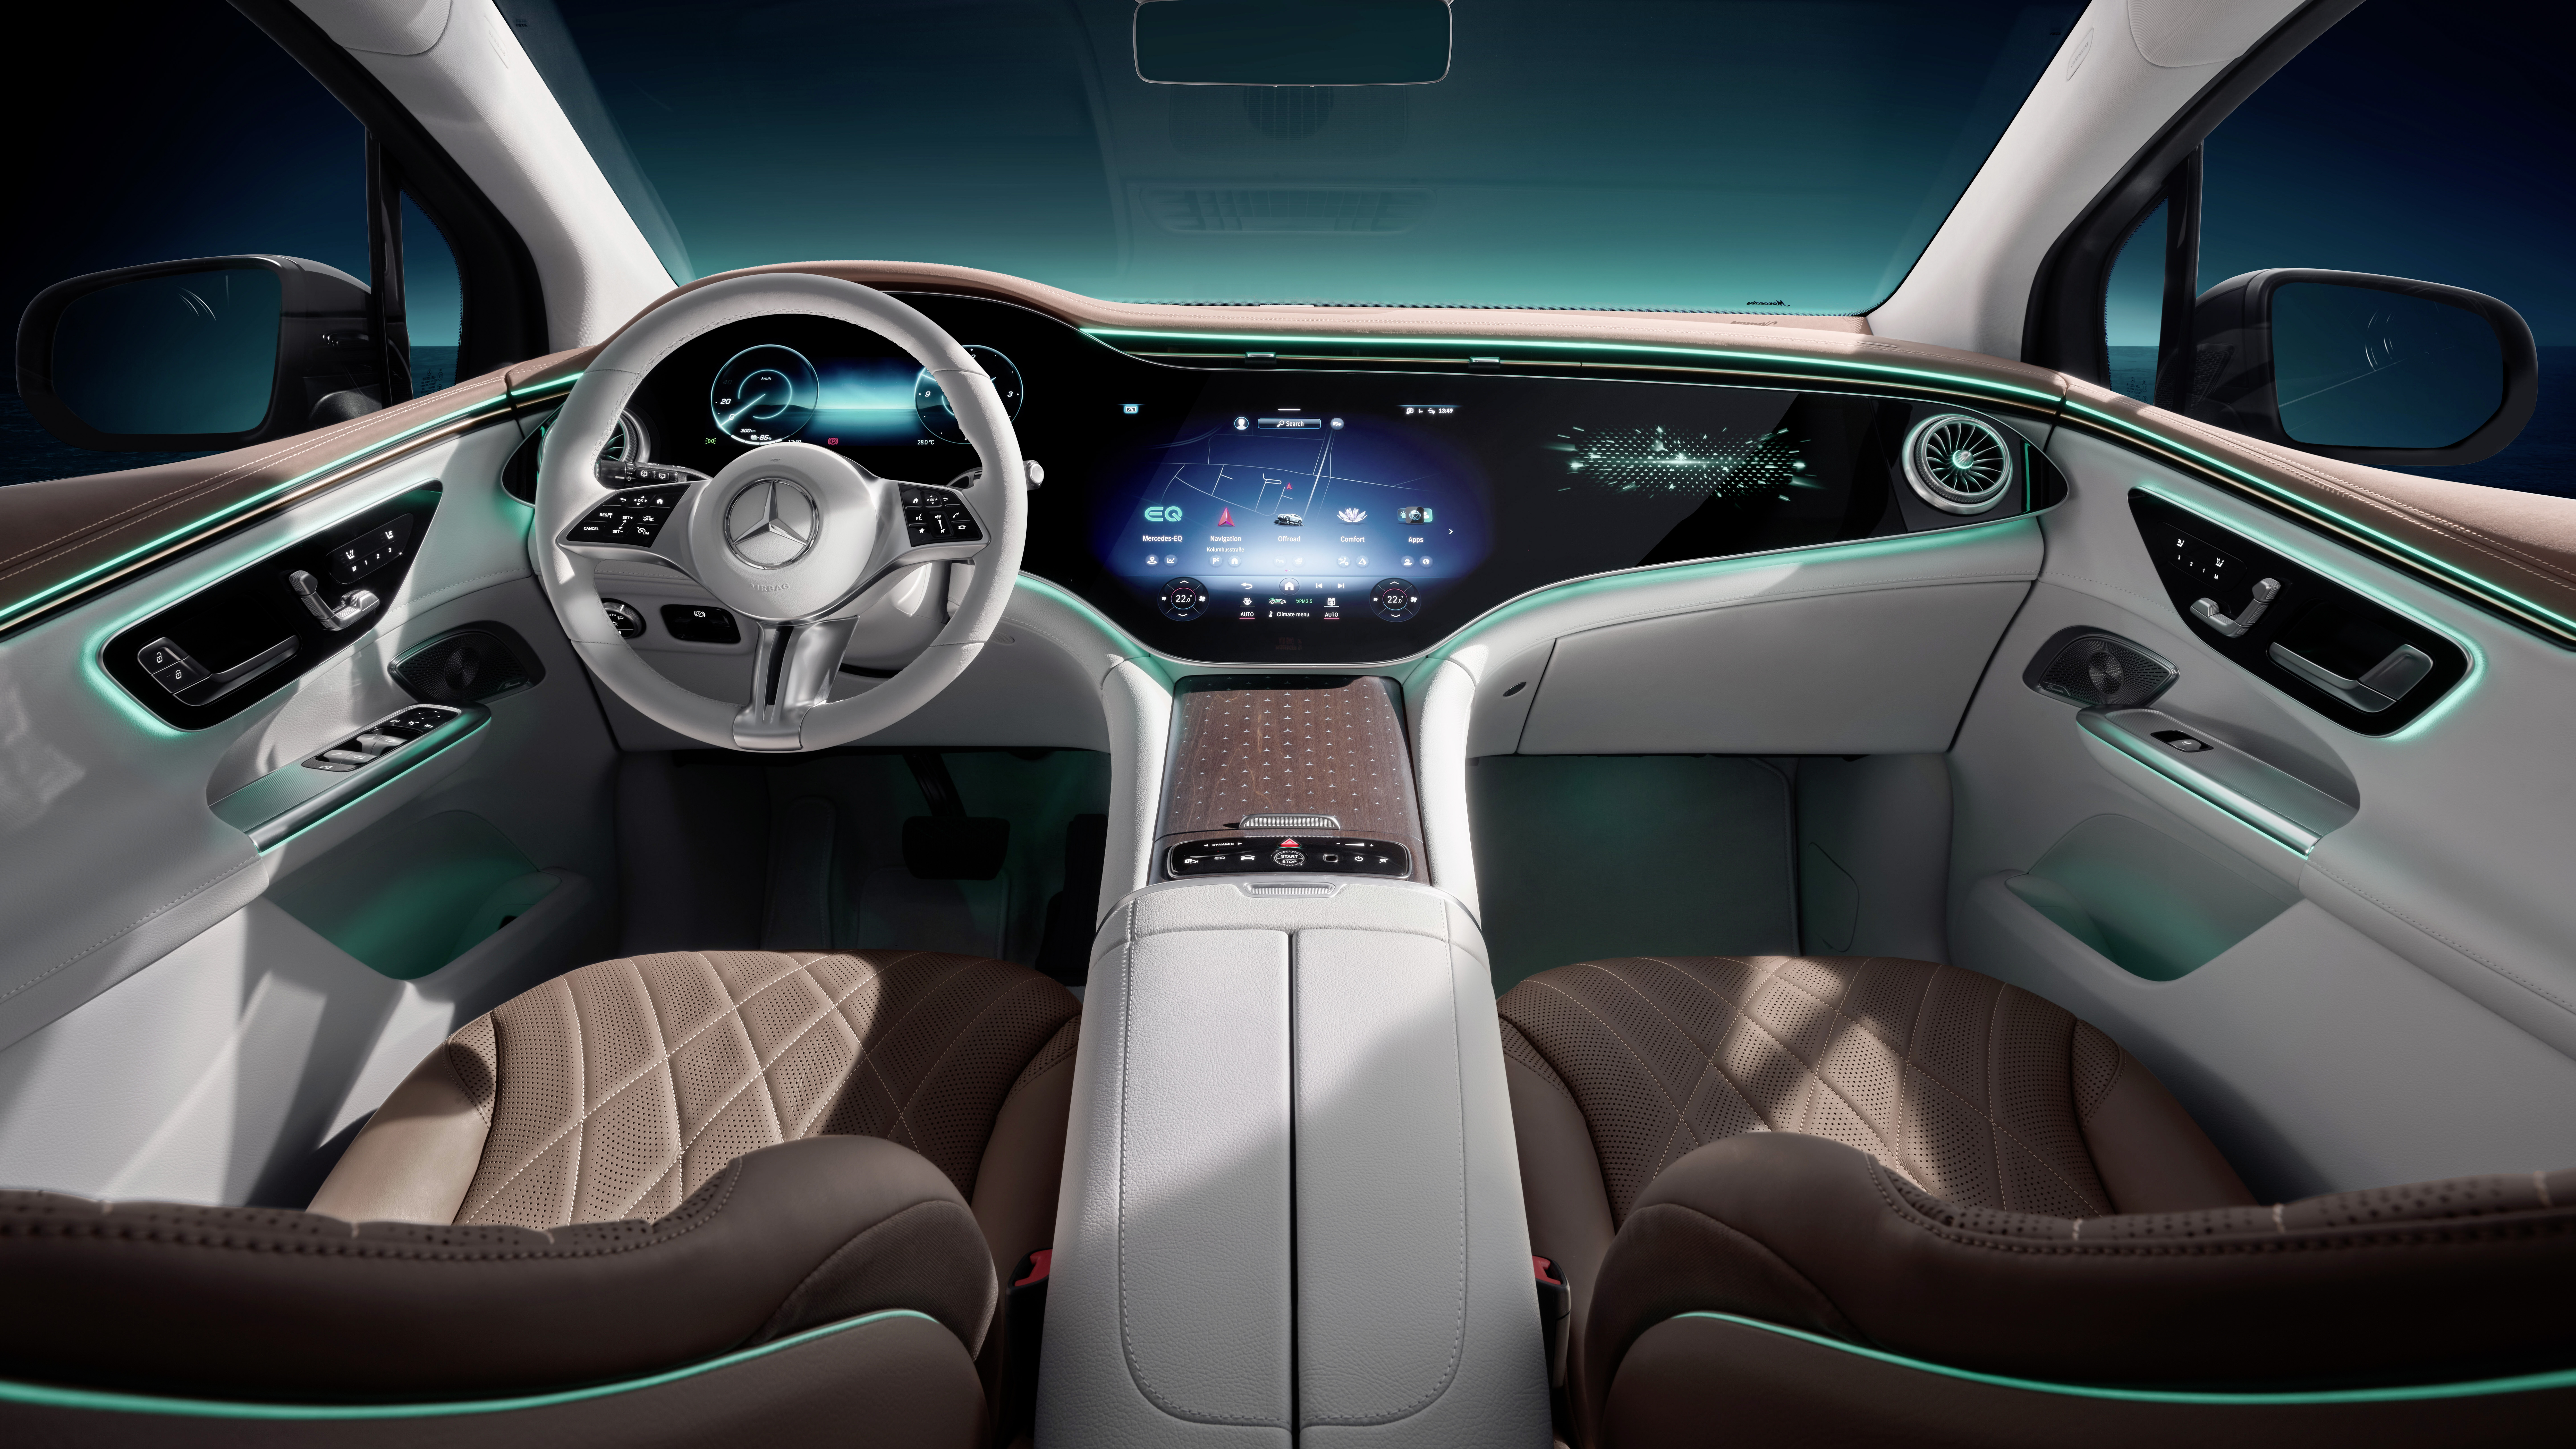 Mercedes-Benz shows EQE SUV interior as an appetizer